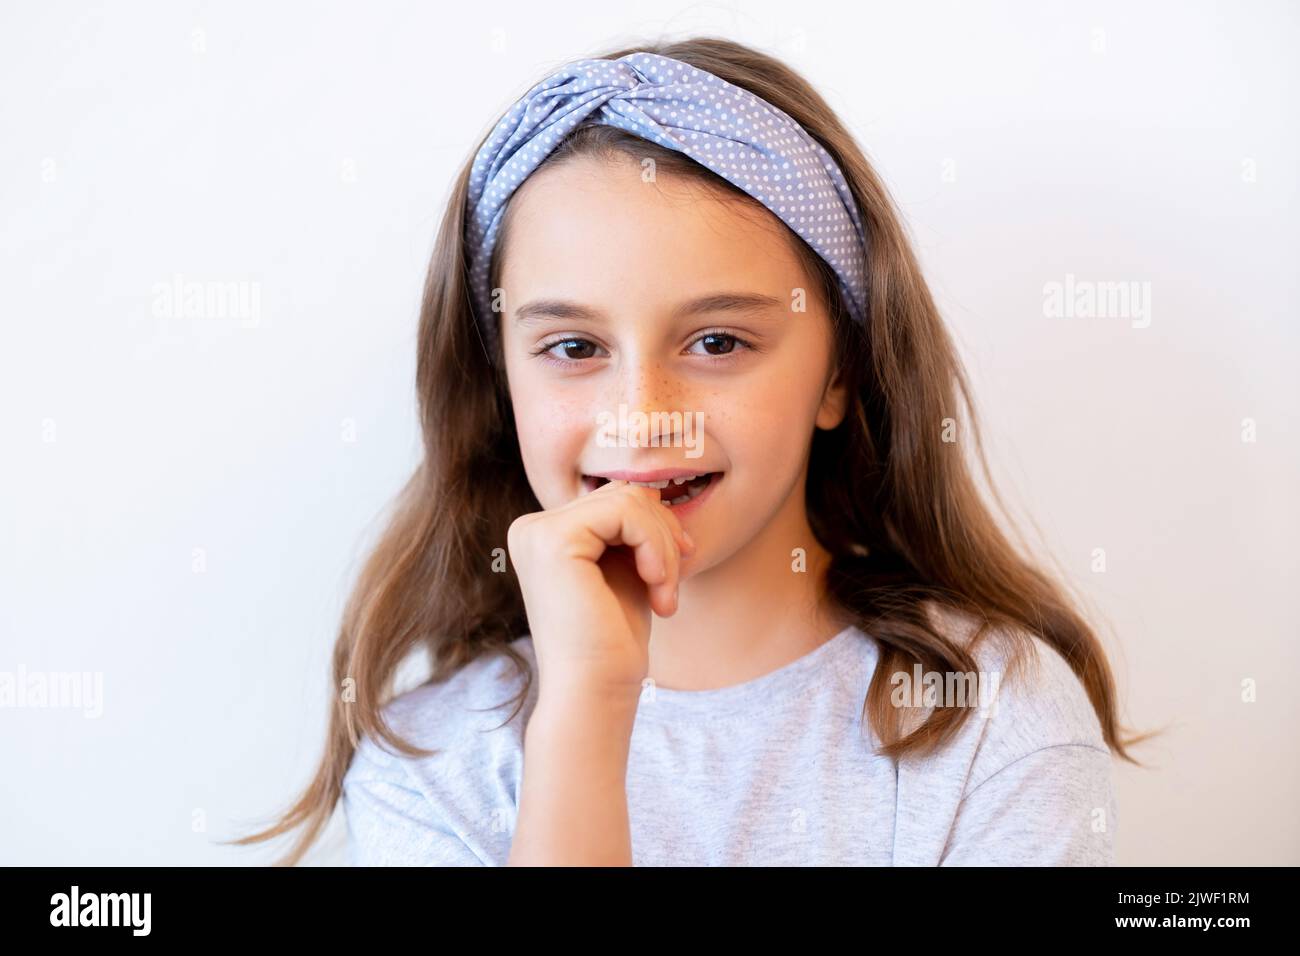 curious kid portrait child dream intrigued girl Stock Photo